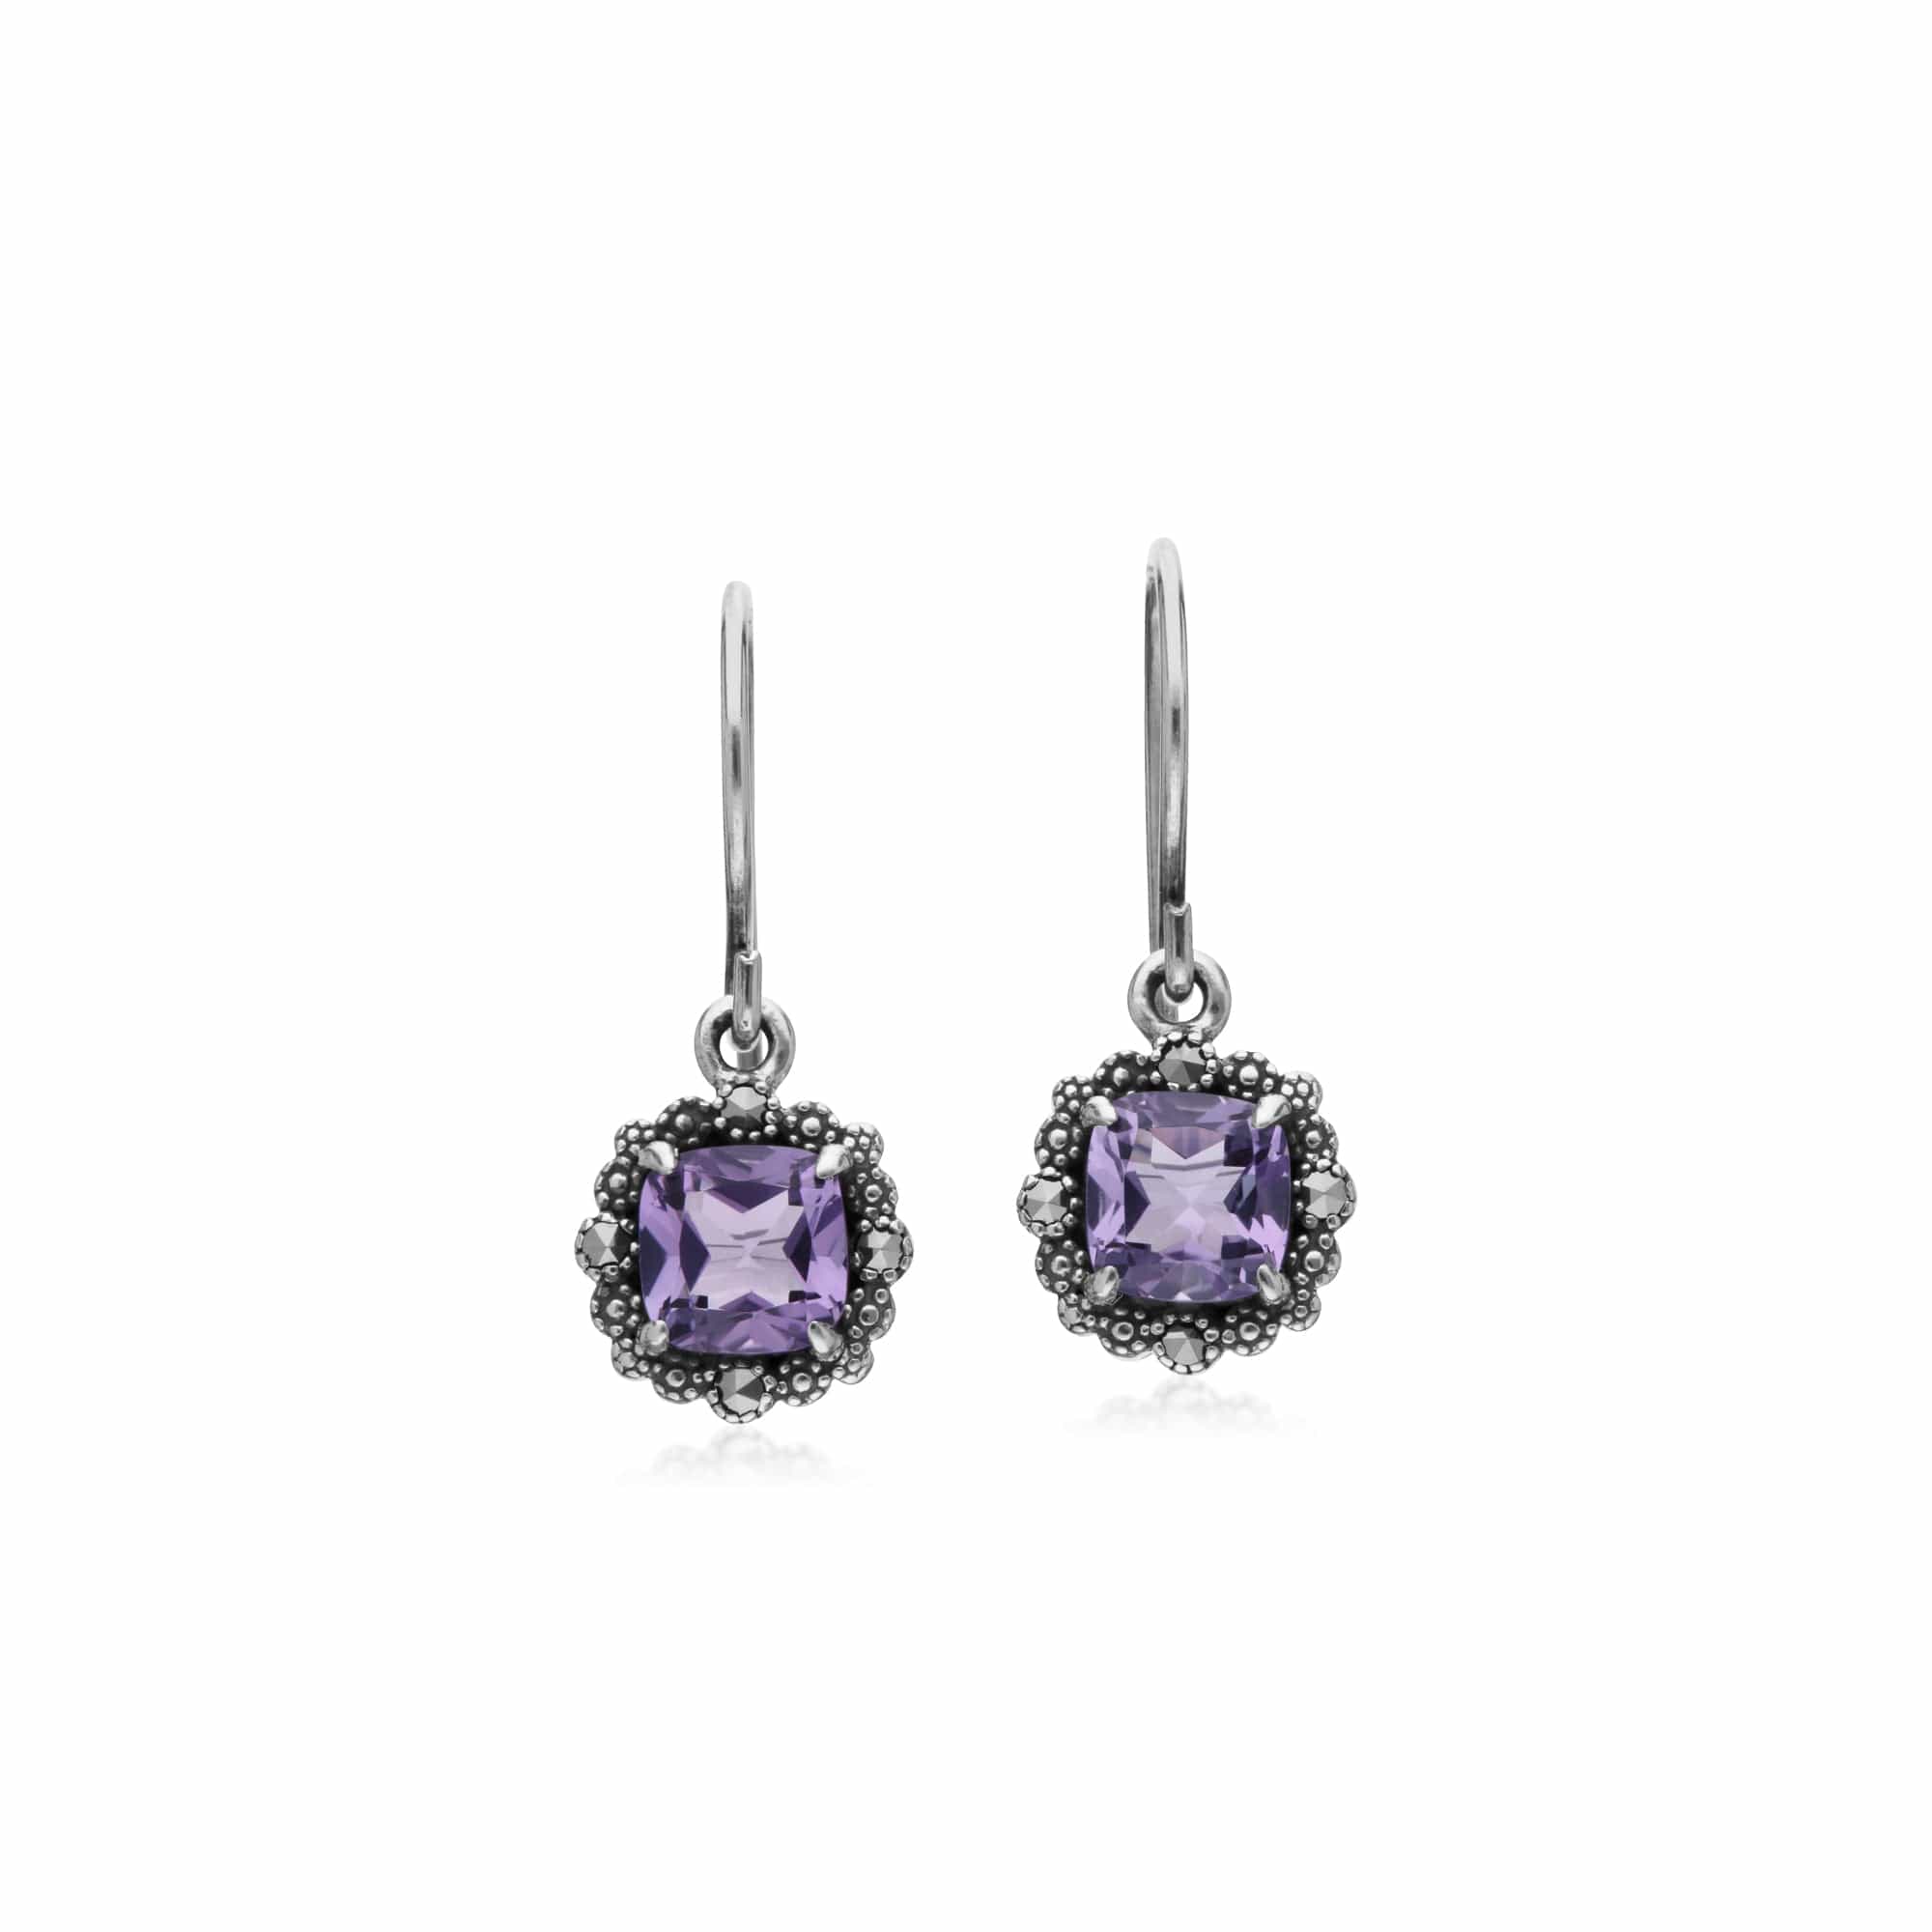 214E870902925-214P301501925 Art Deco Style Cushion Amethyst & Marcasite Cushion Drop Earrings & Necklace Set in 925 Sterling Silver 2